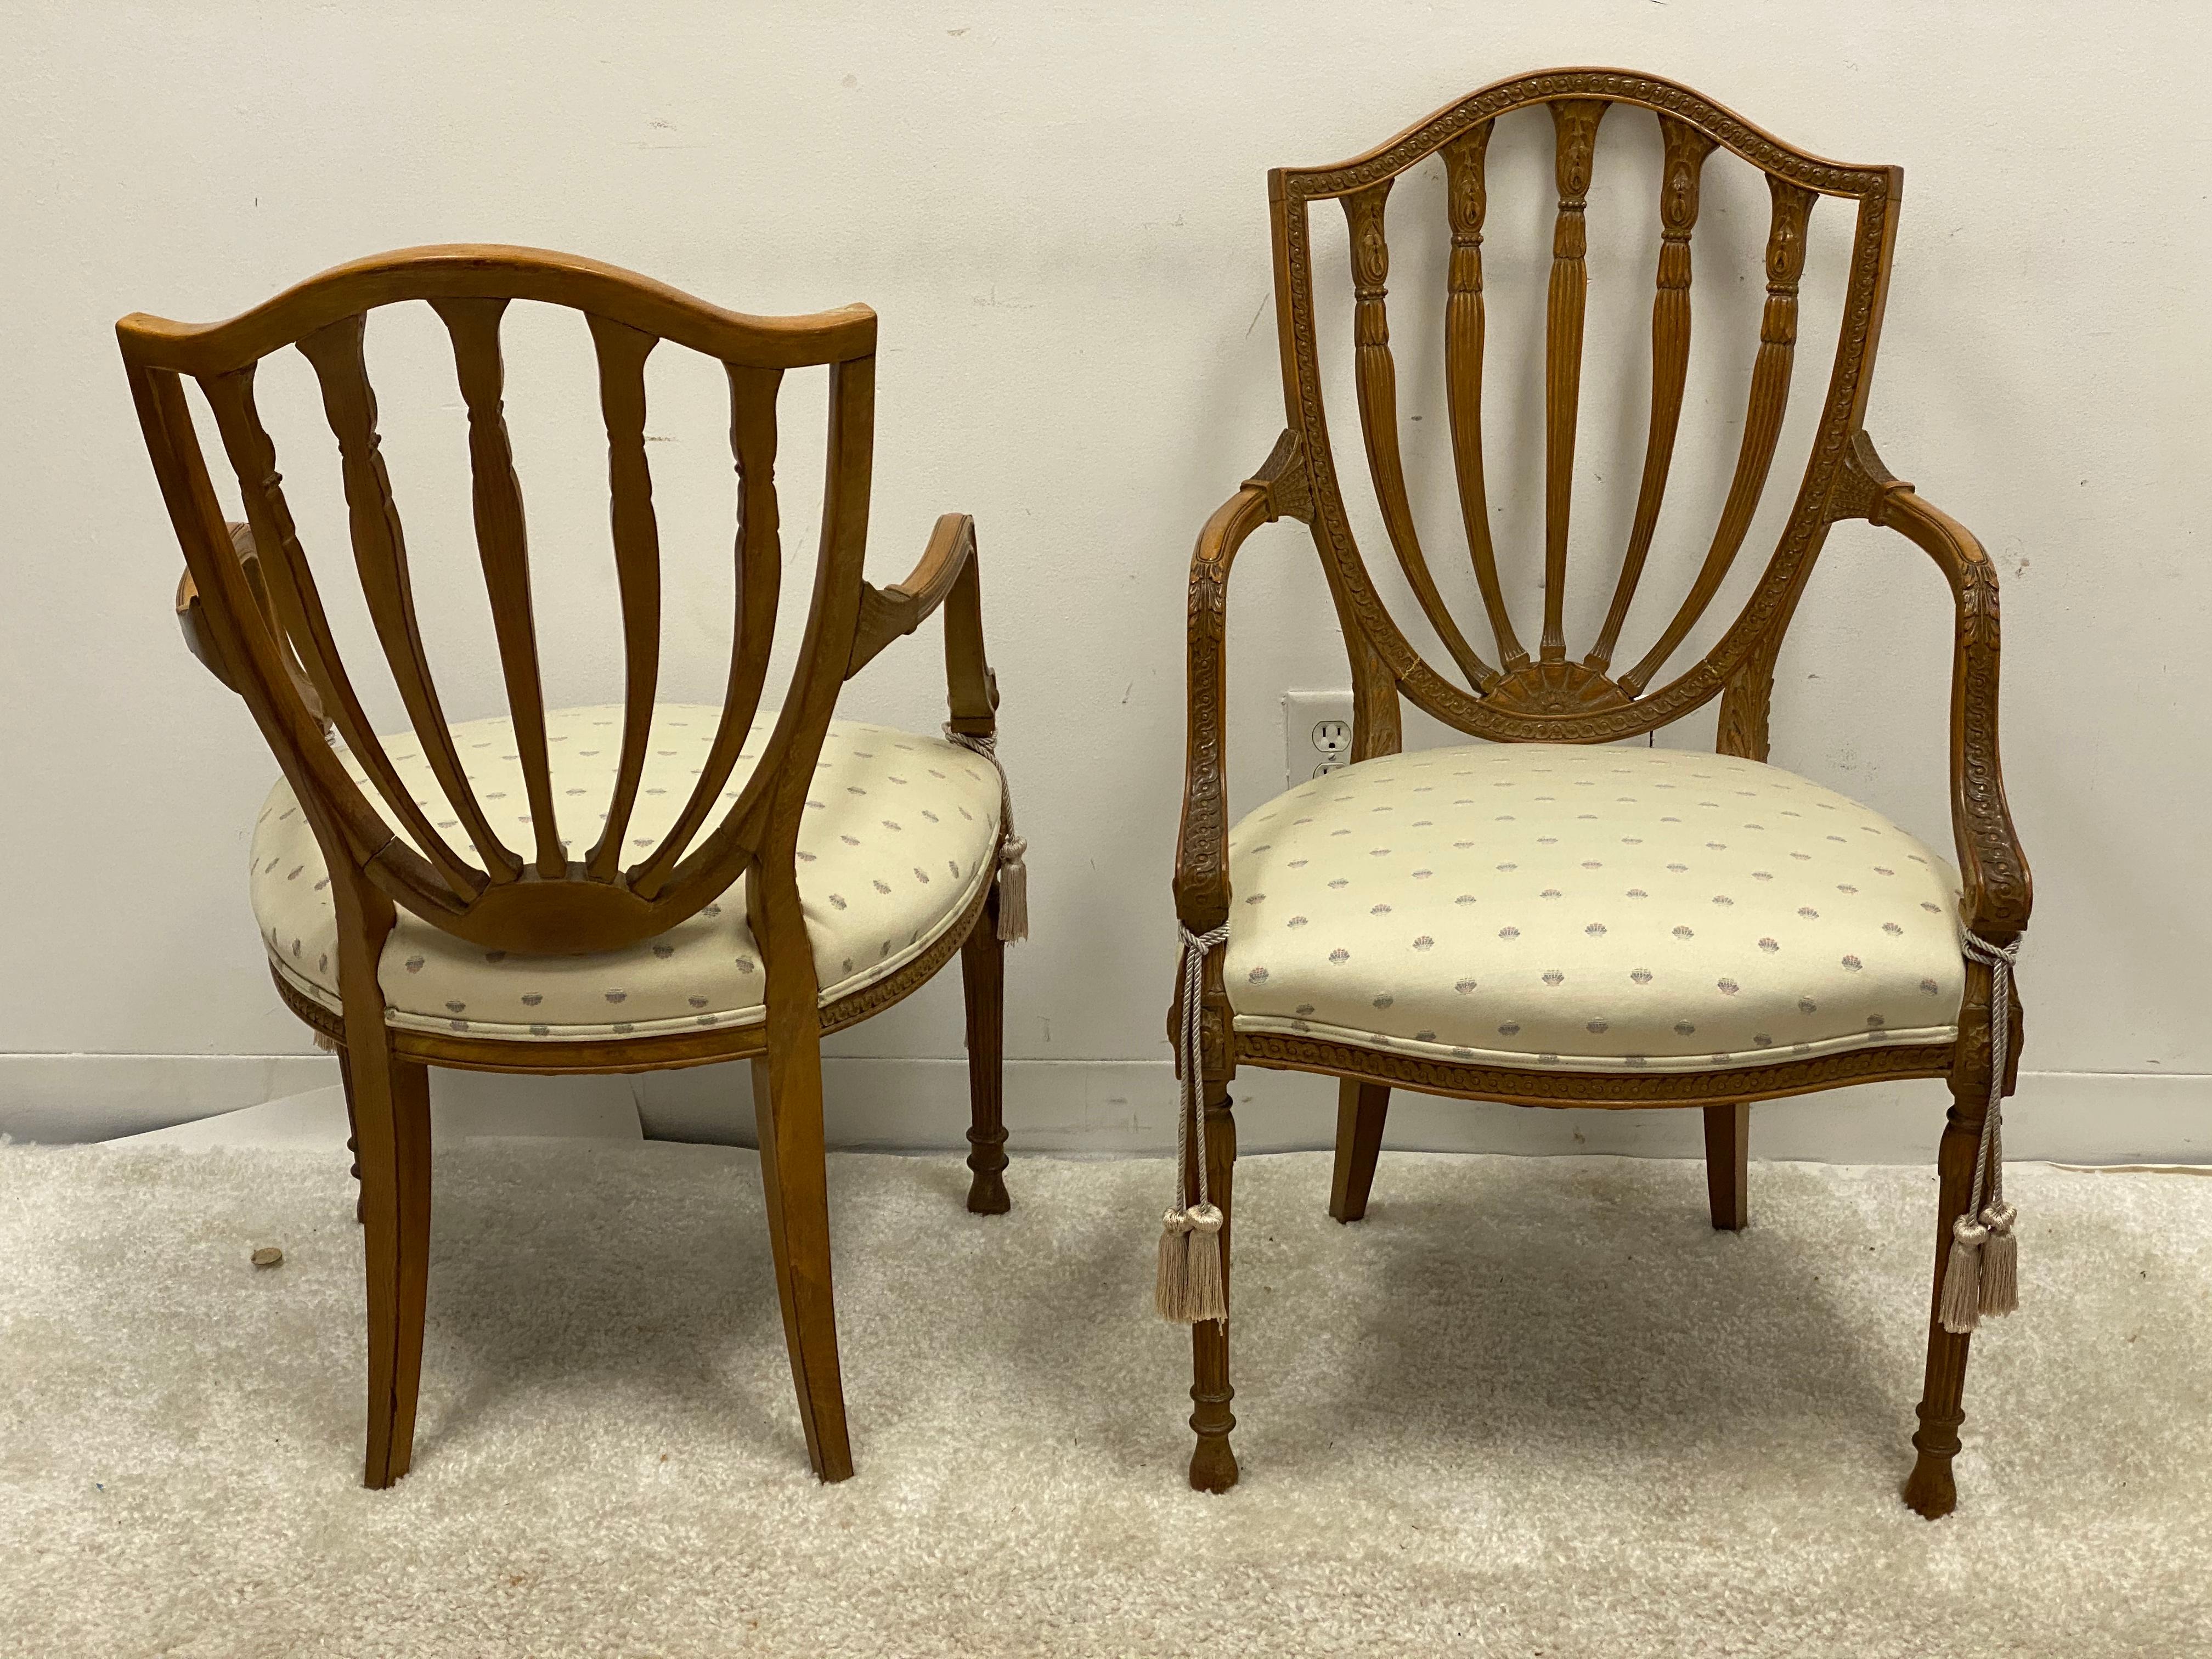 Upholstery Baker Furniture Carved Fruitwood Shieldback Adam Style Chairs, Pair For Sale